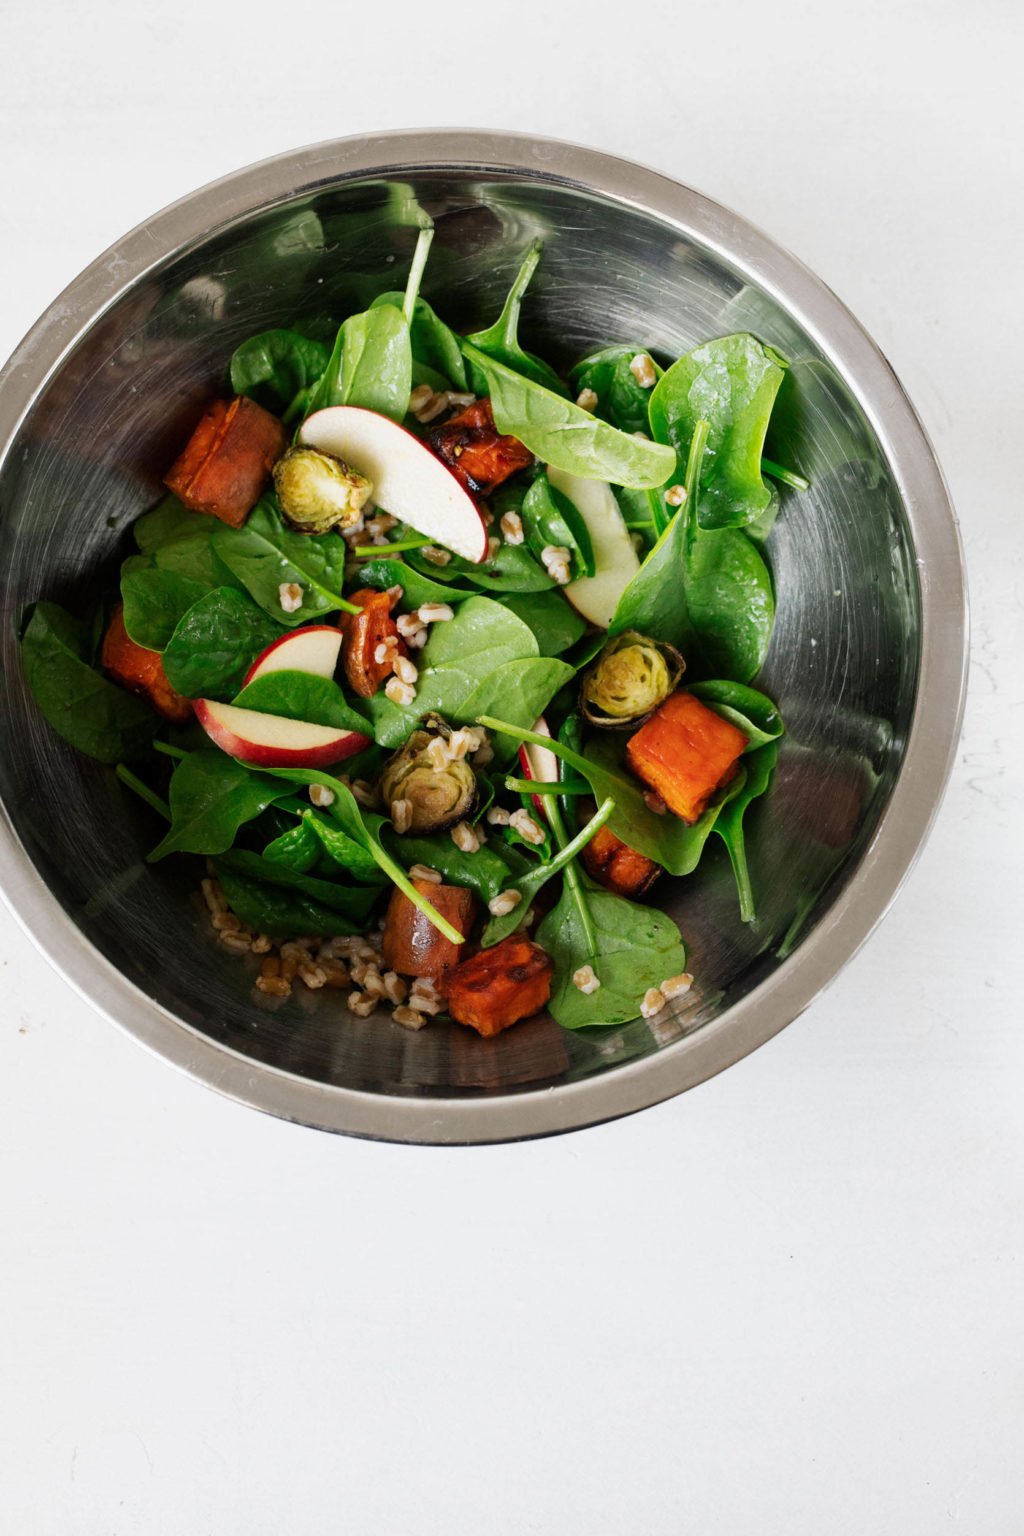 A stainless steel mixing bowl is full of the colorful ingredients for an autumn harvest salad. It rests on a white surface.